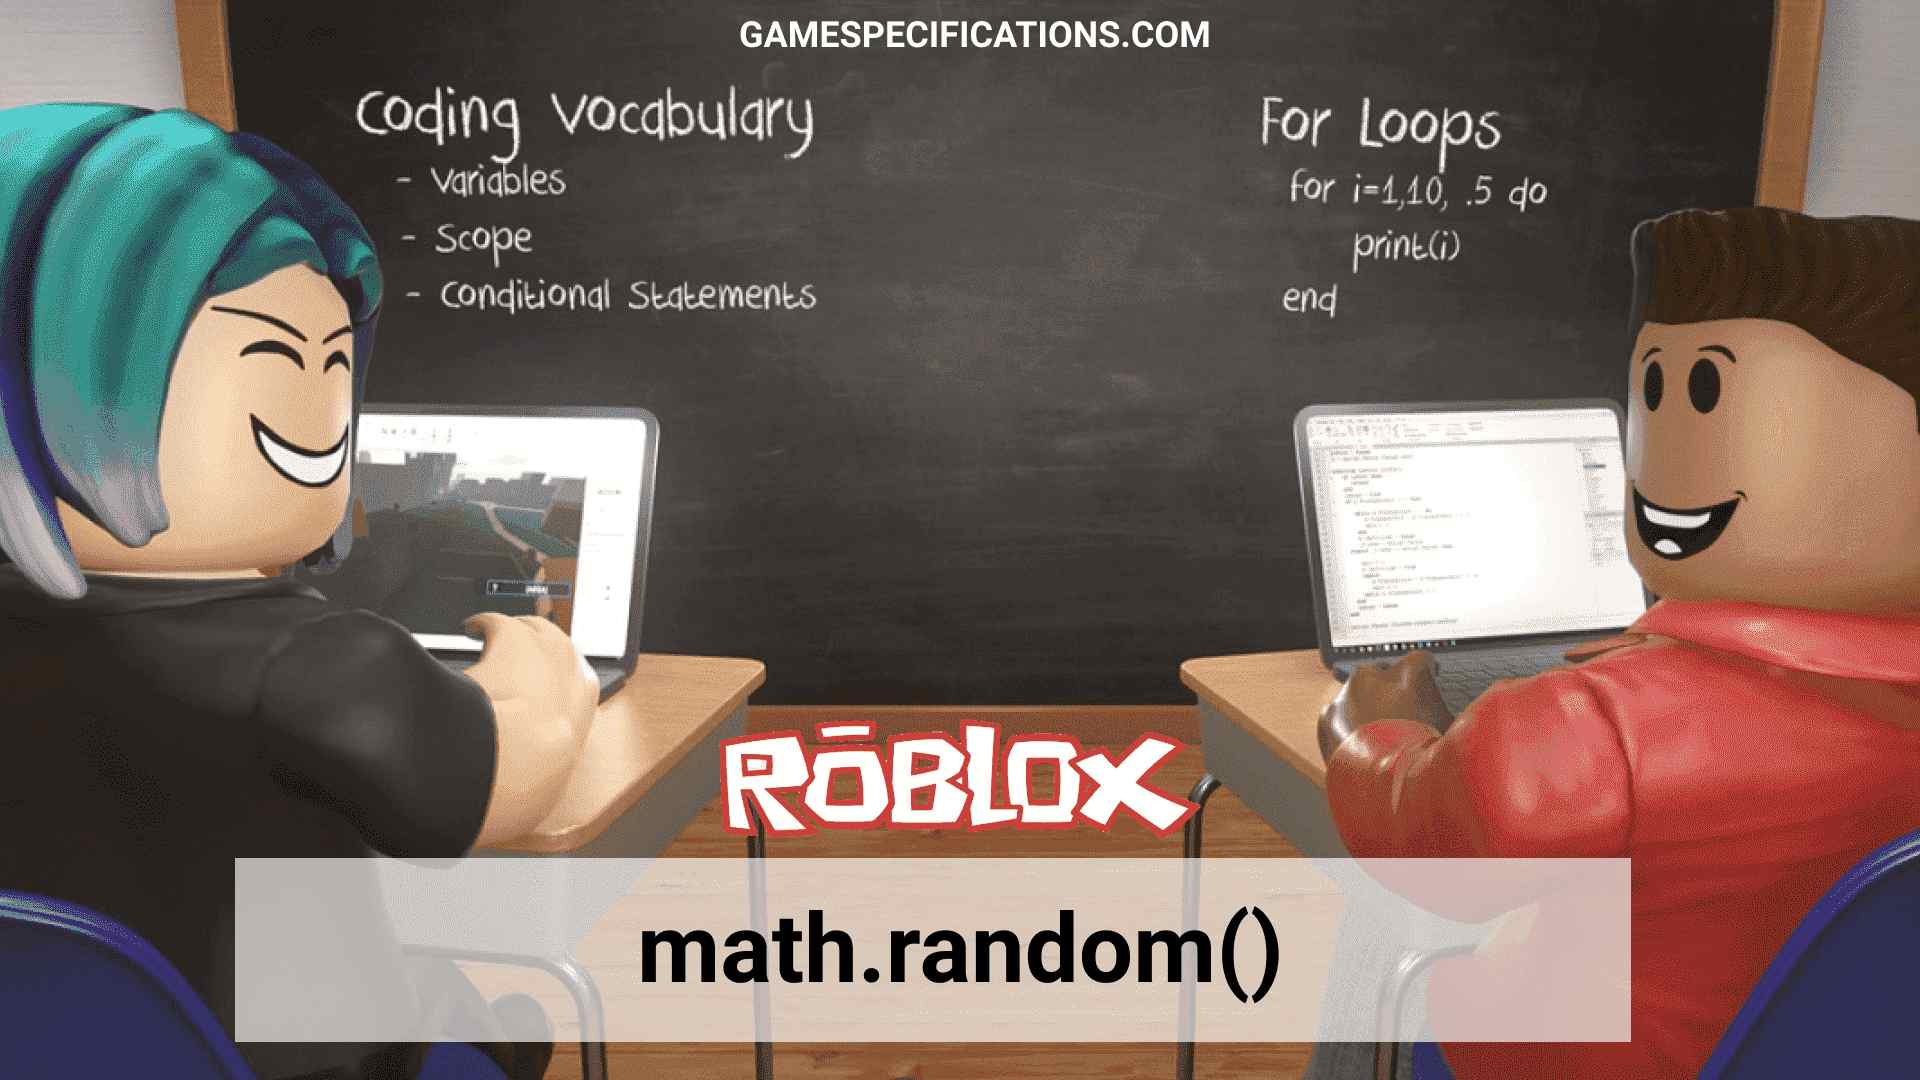 Roblox Math Random How To Use Math Random Efficiently In Roblox Game Specifications - roblox random number between